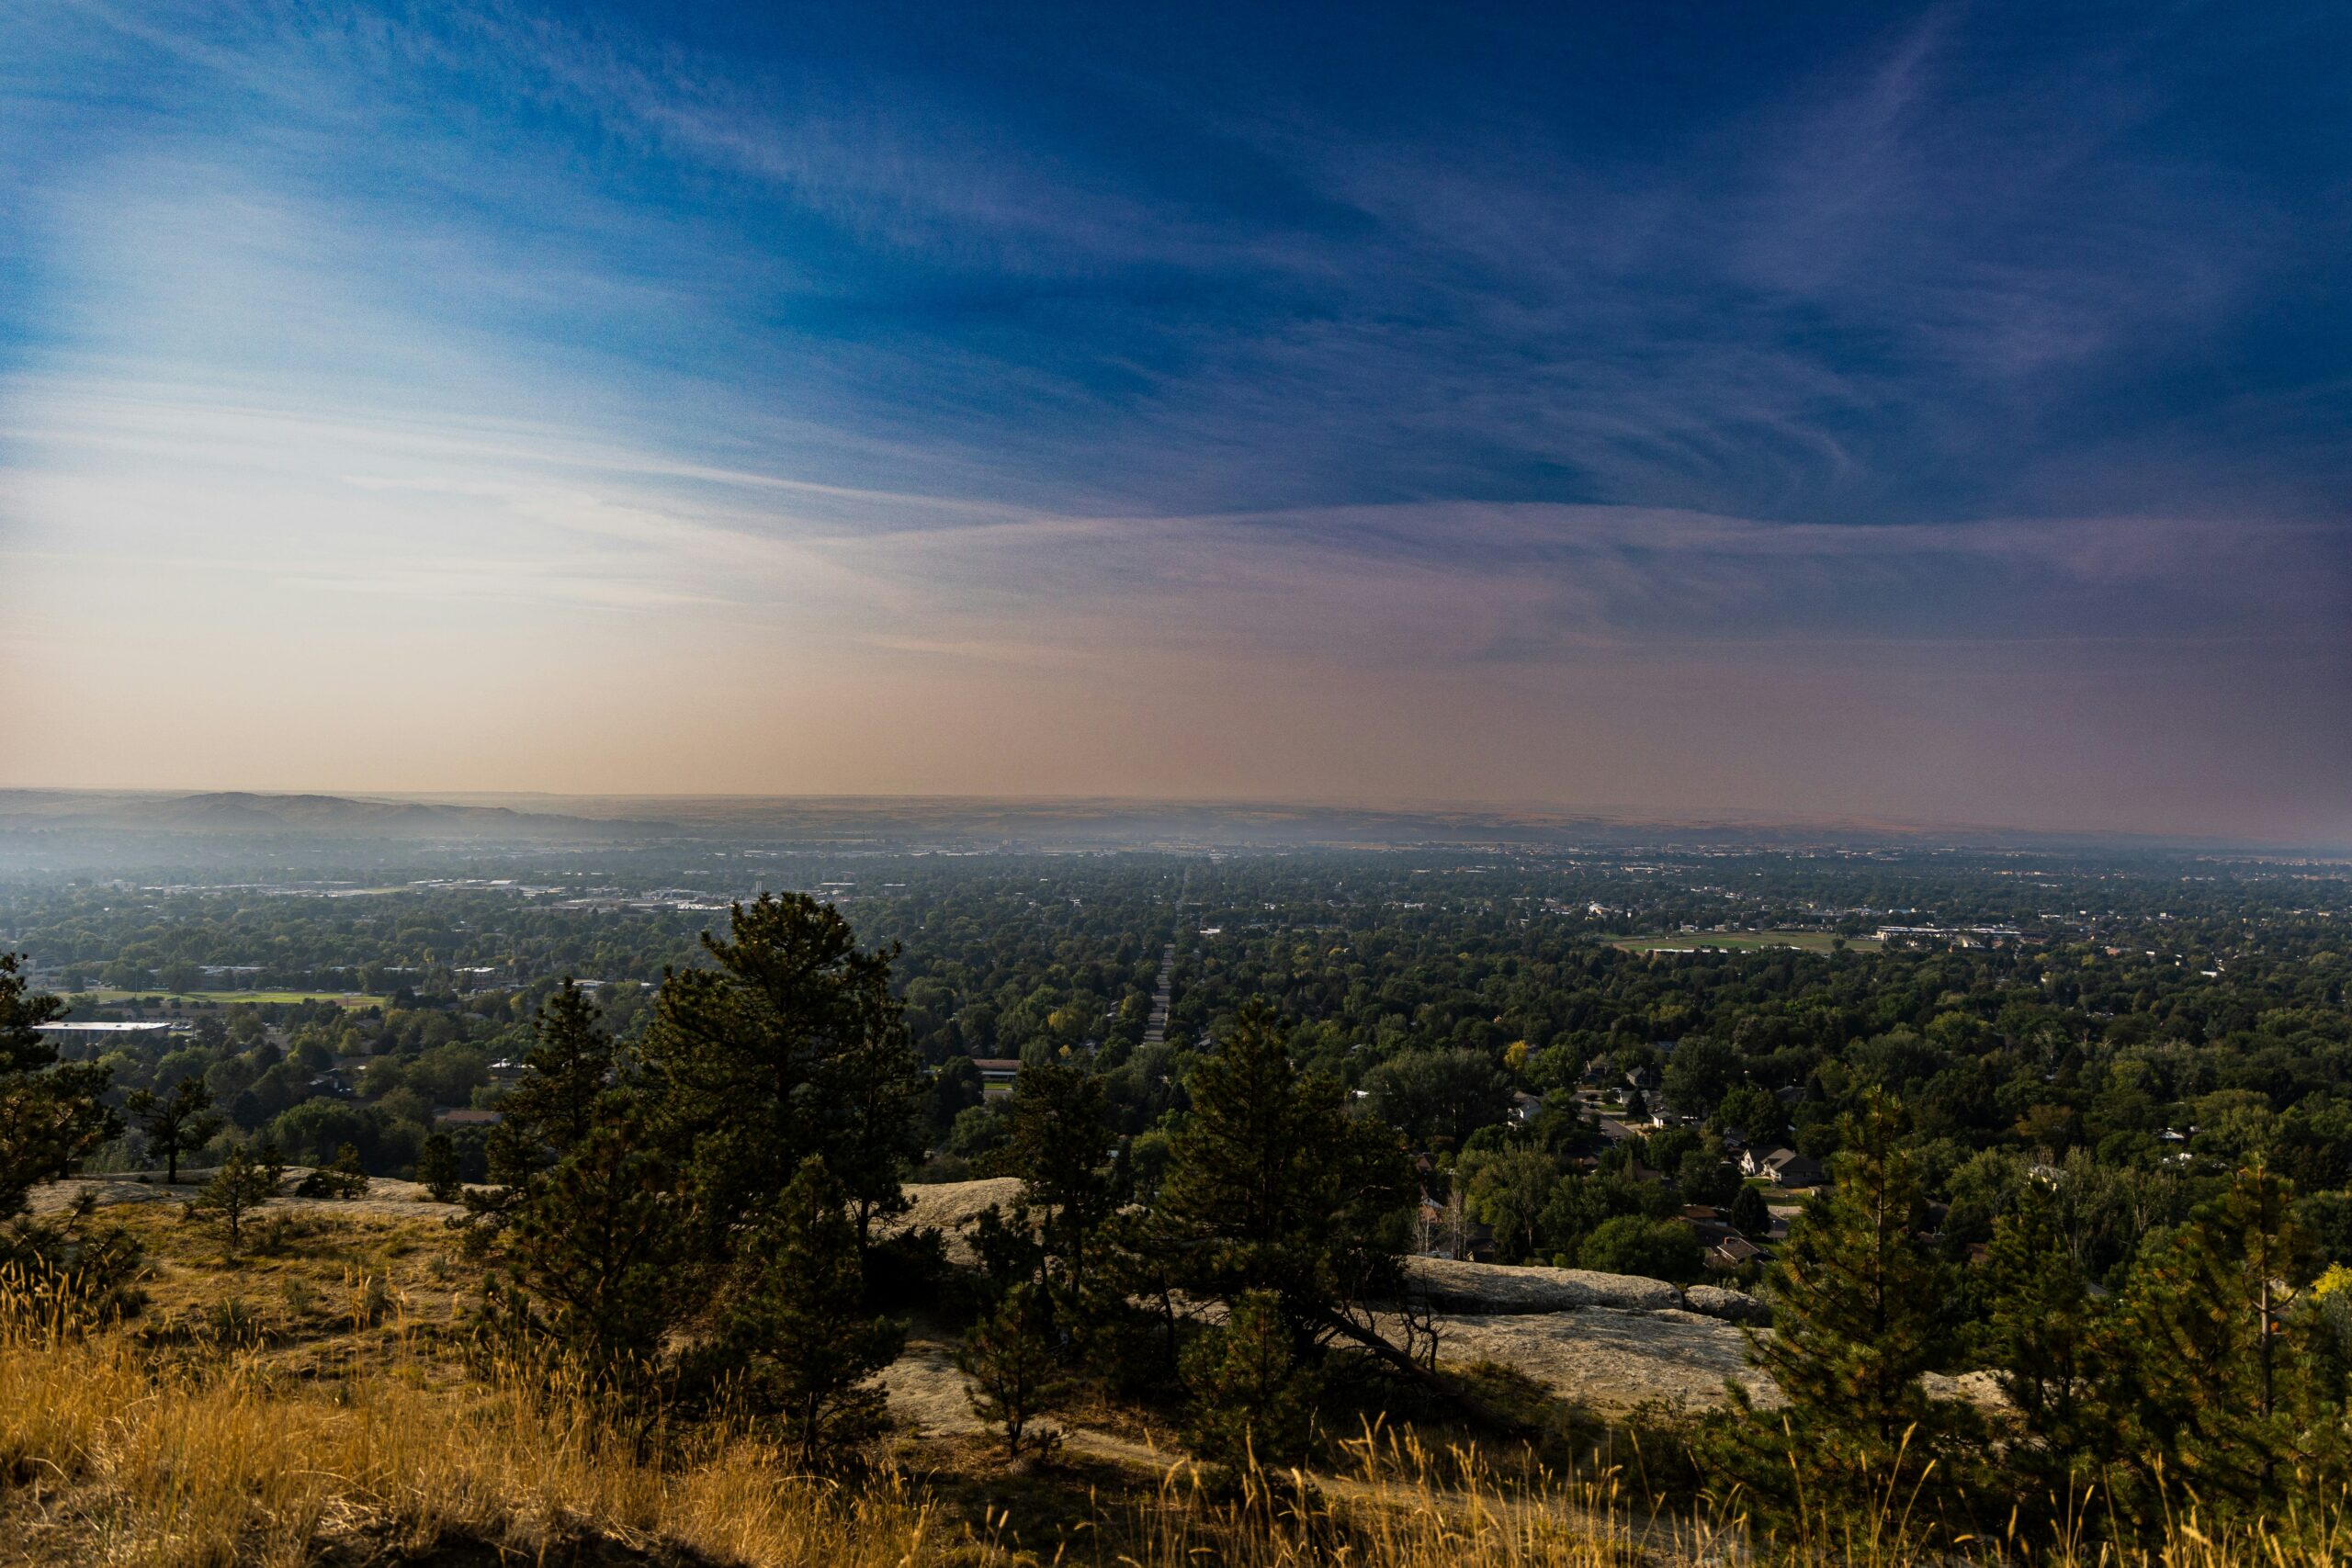 For families interested in moving to a small city with entertainment options and restaurants, Billings is one of the best places to live in Montana. Pictured: A view of Billings, Montana